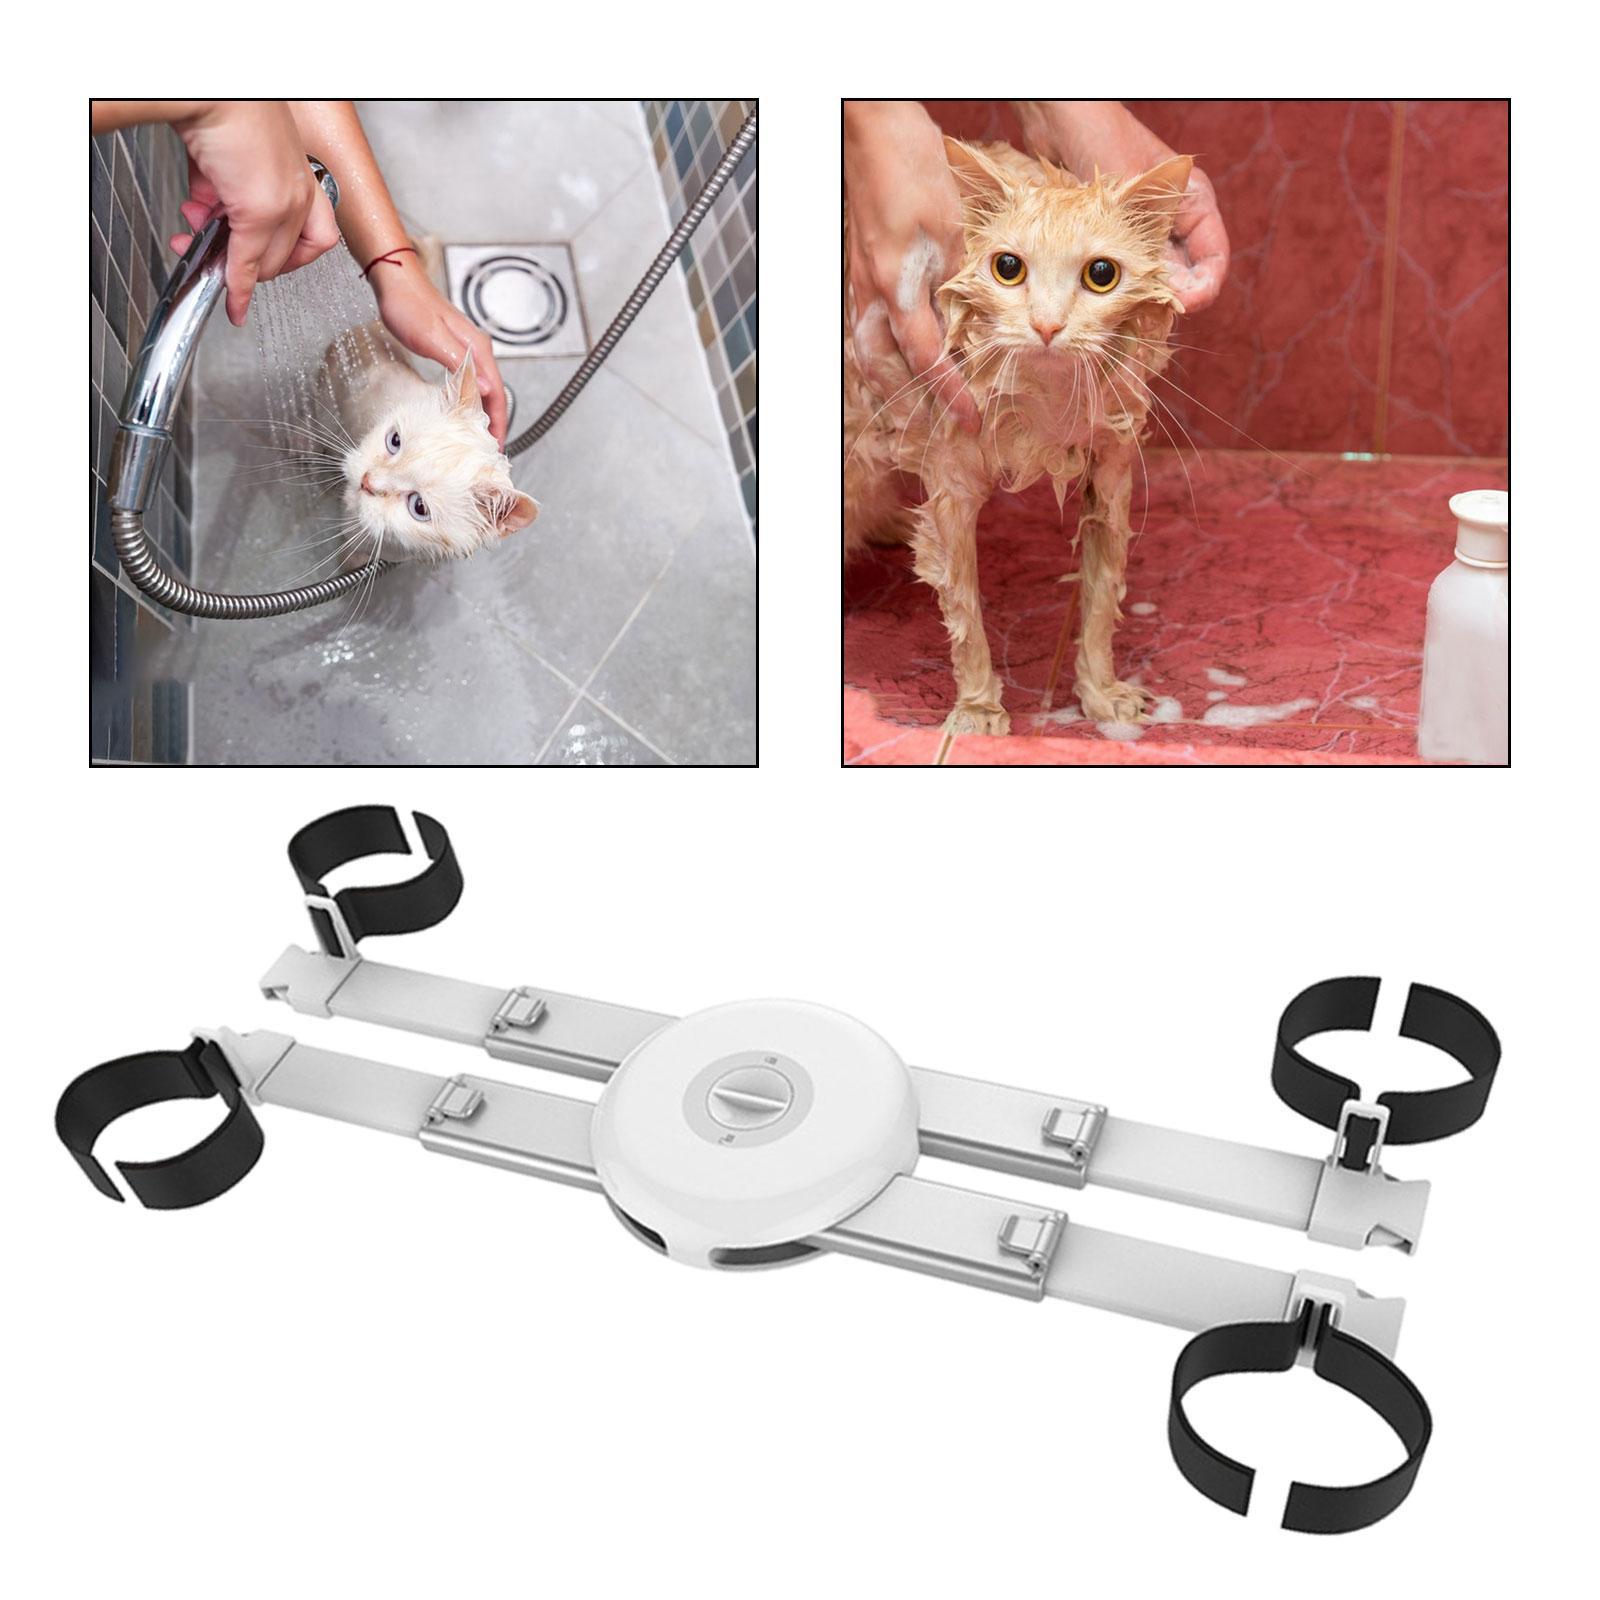 Pet Fixing Bracket Retractable Pet Grooming Holder for Kitty Showering Puppy